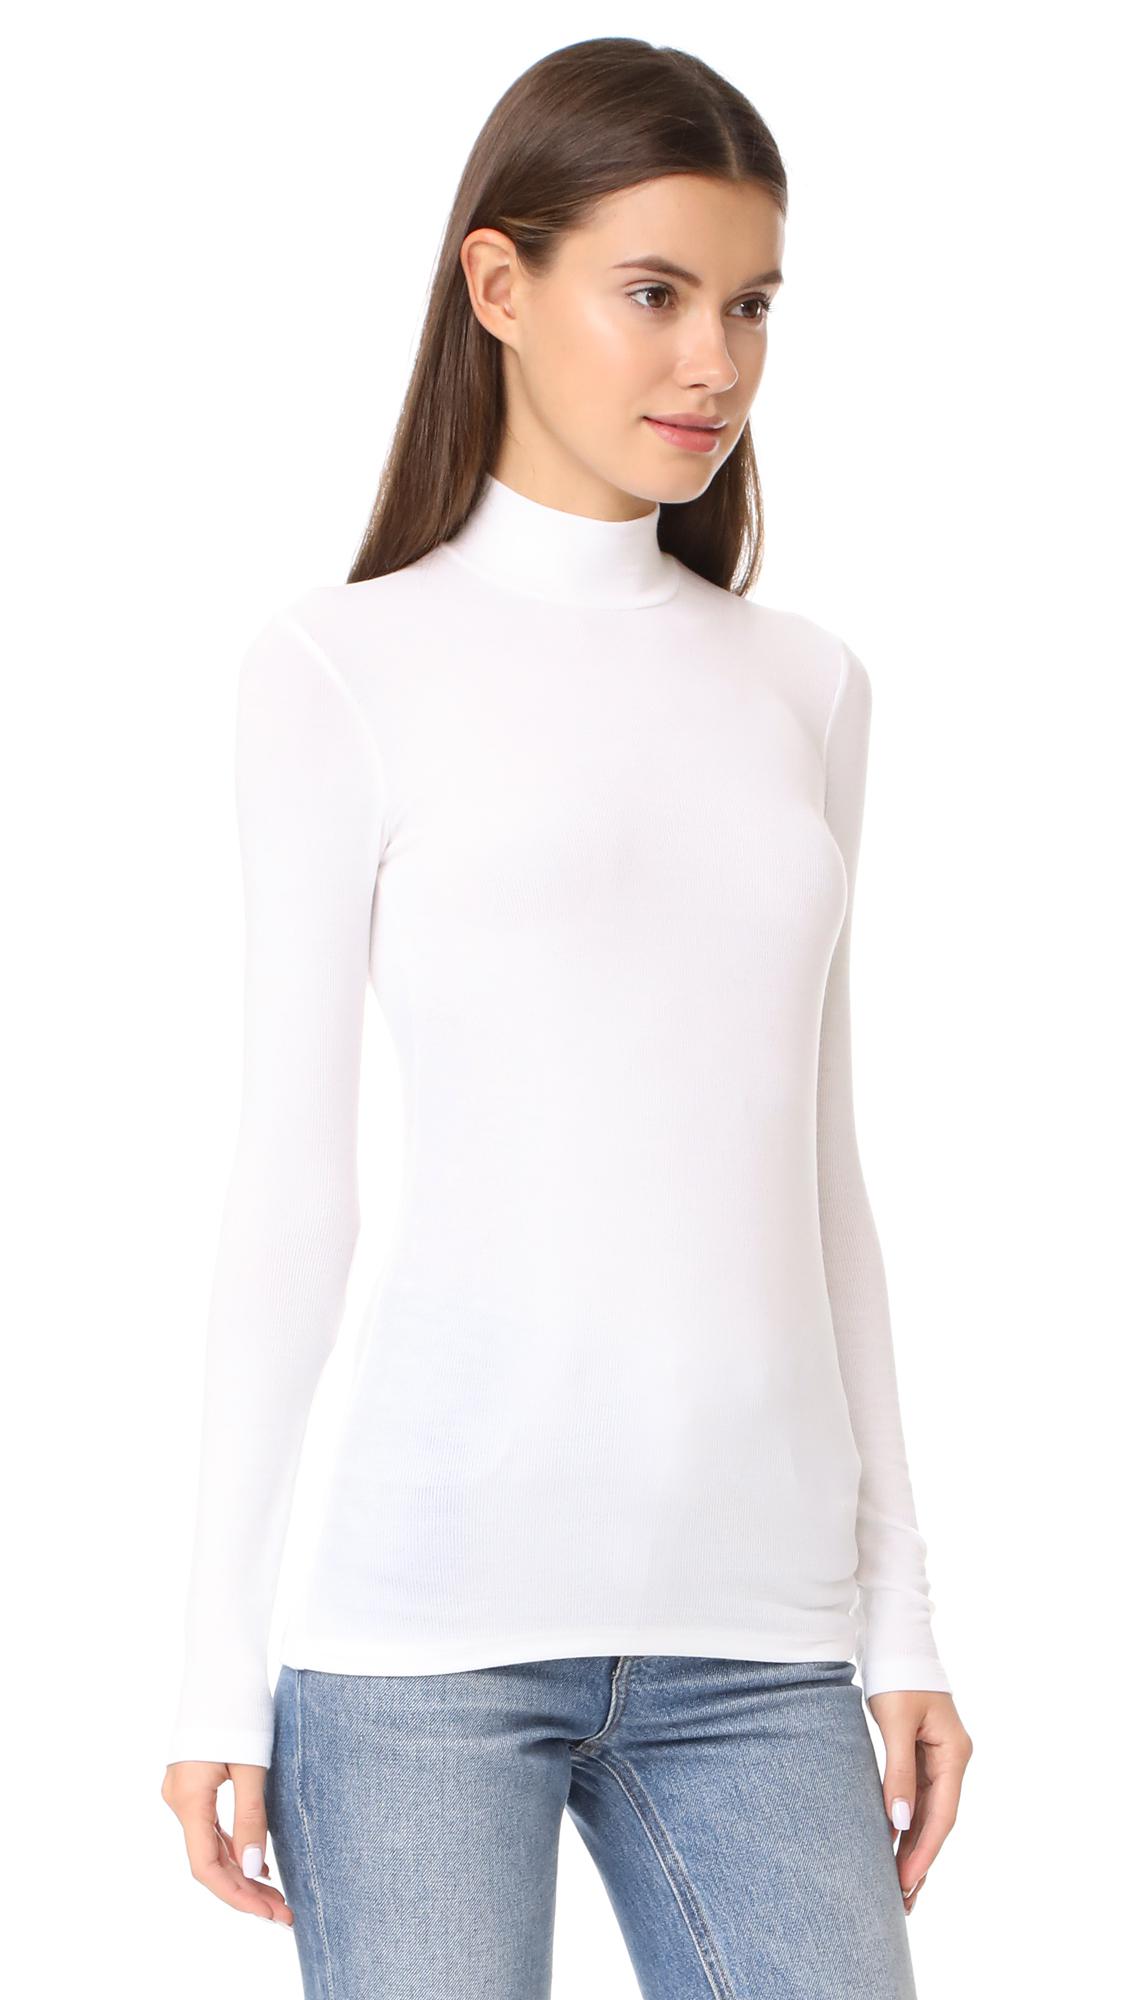 Lyst - Atm Long Sleeve Mock Neck Top in White